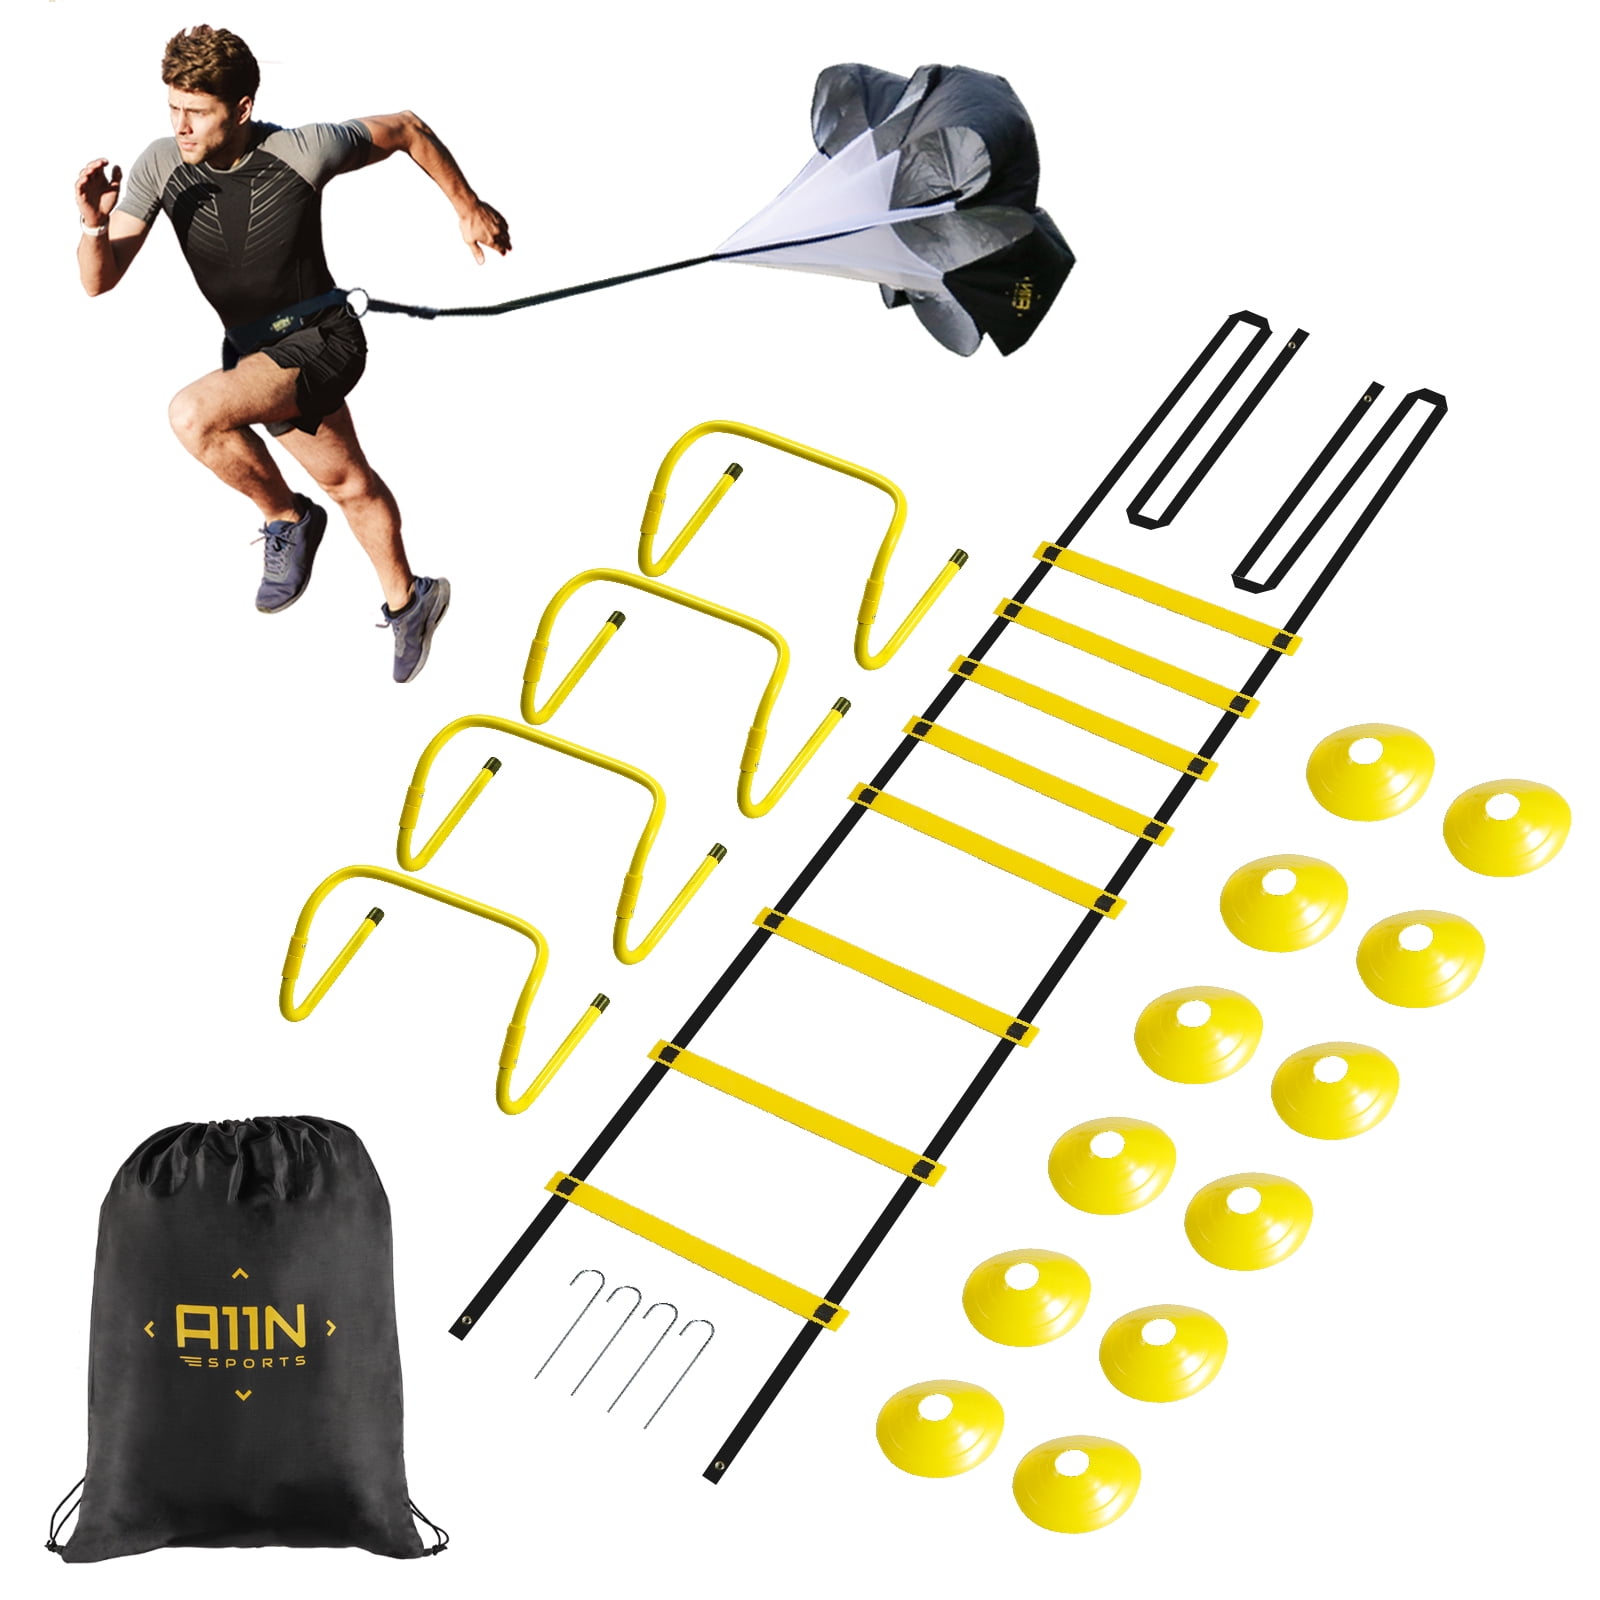 Ideal for Soccer Football with Connecting Snap Yellow CELEMOON Upgraded Material 12-Rungs Agility Speed Training Ladder Black Carry Case Feet Training Fitness 